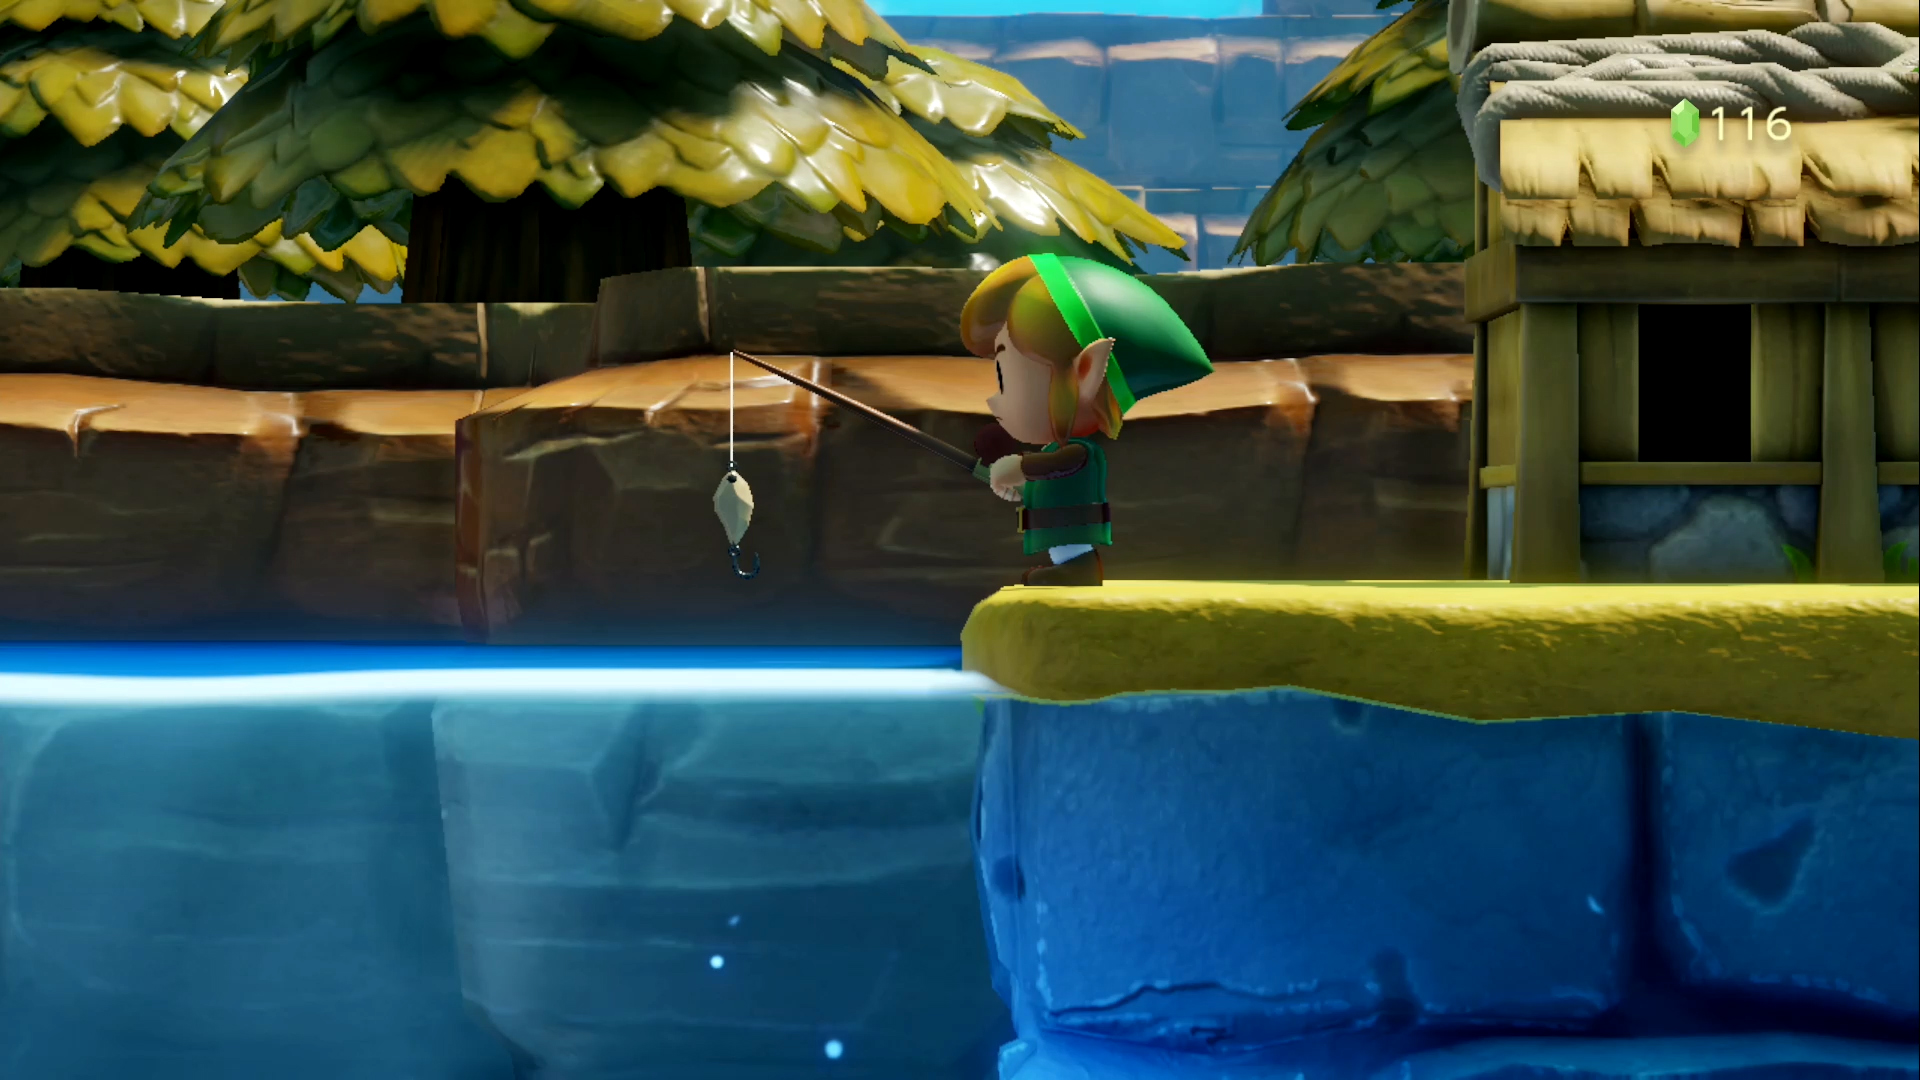 The director of Zelda: Link's Awakening talks in detail about fishing - iGamesNews